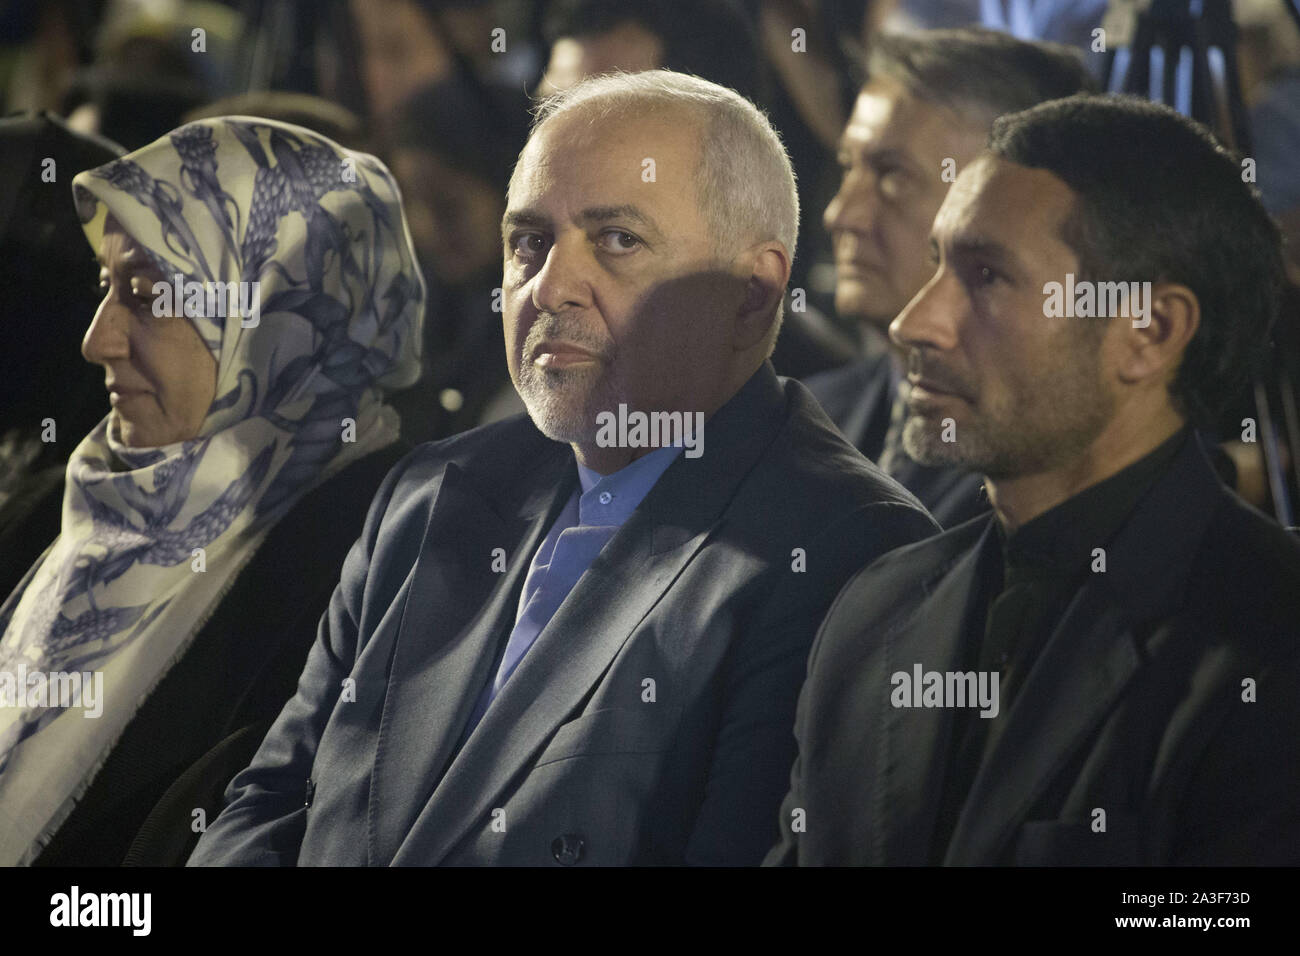 Tehran, Iran. 7th Oct, 2019. Iranian Foreign Minister, MOHAMMAD JAVAD ZARIF, attends a ceremony to commemorate Tehran Day at Golestan Palace in Tehran, Iran. This Day is the date that Tehran was officially chosen as the capital of Iran by the Qajar Dynasty. Zarif said: ''There are two points to mention: the first is about identity and the second one is on citizenship. Identity means talking and communicating with others. Identity is a prerequisite in order to be present in society. We are proud of our identity and history, but we don't show it off. We all will leave behind economic problems. Stock Photo